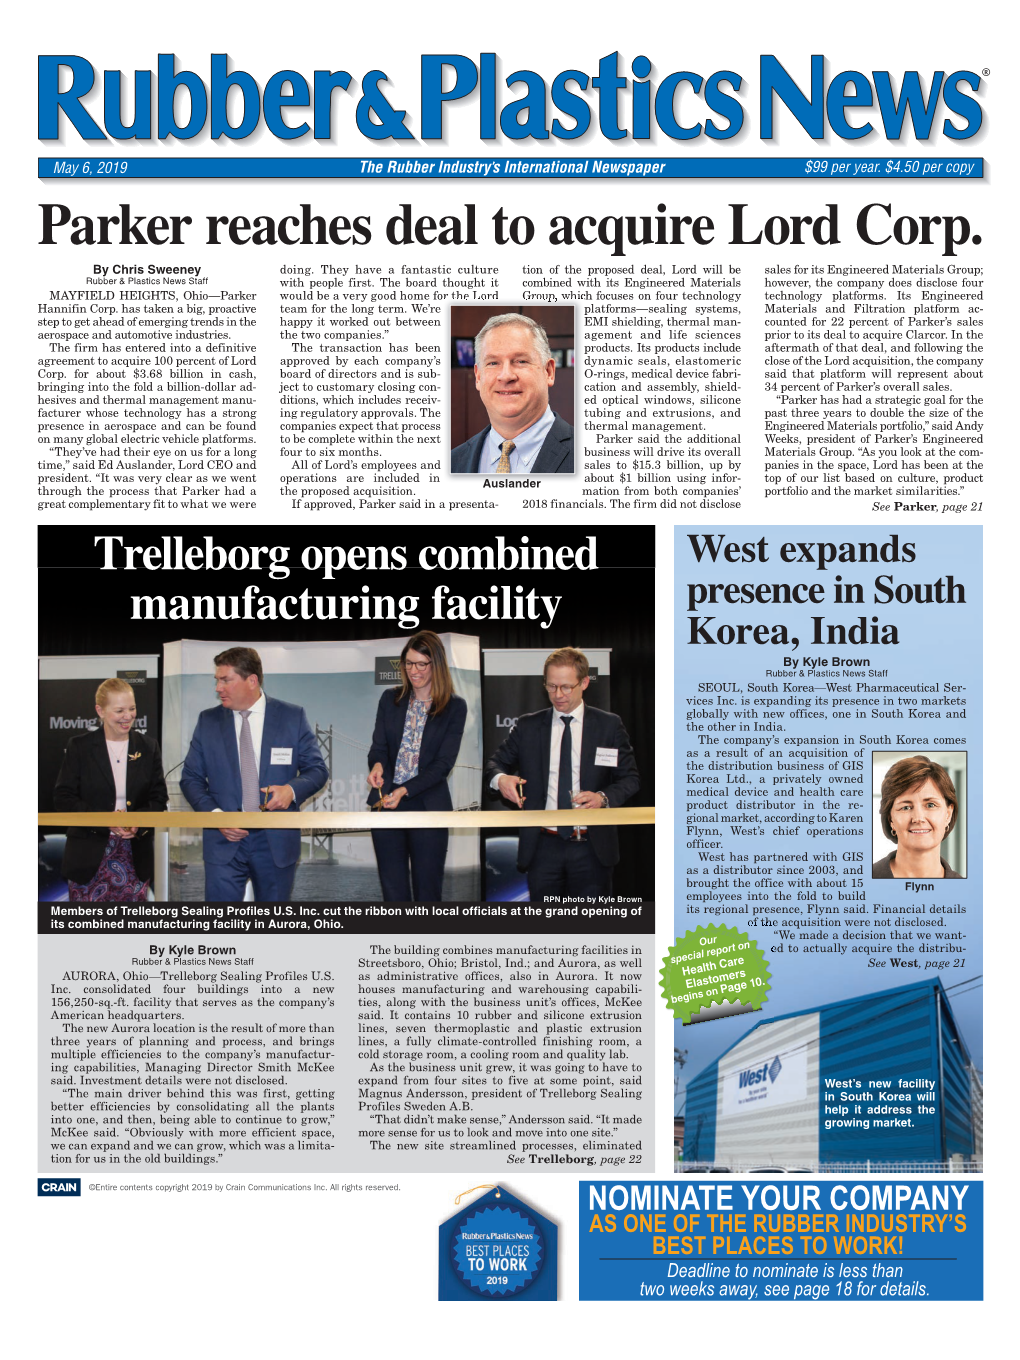 Parker Reaches Deal to Acquire Lord Corp. by Chris Sweeney Doing